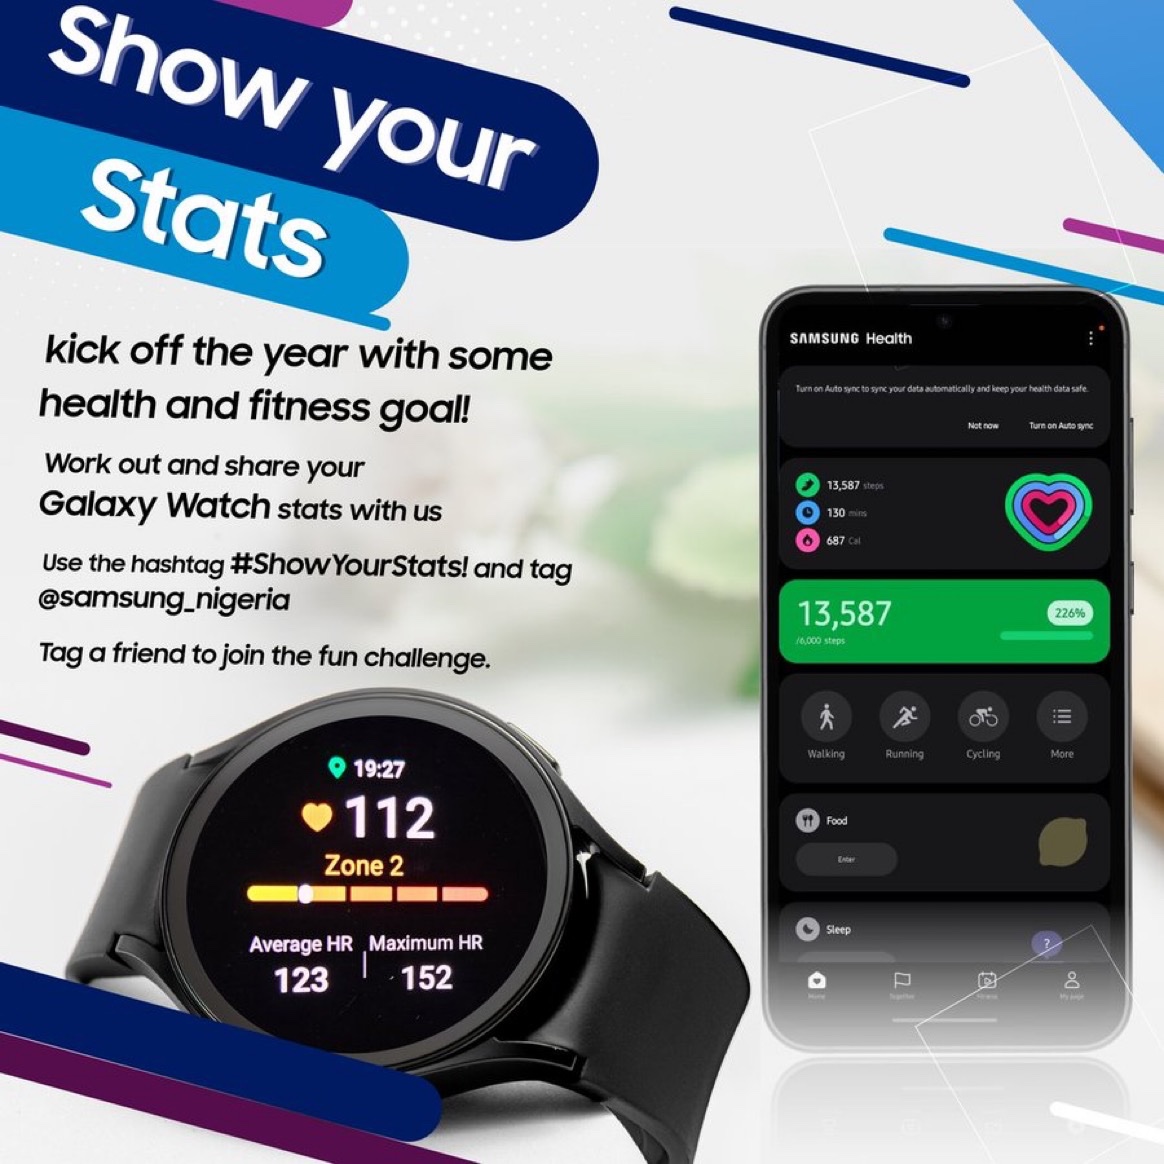 Use your Galaxy device to monitor your fitness progress and share it with us. Use #MySamsungGalaxyStats and you could win some amazing prizes from @SamsungNigeria